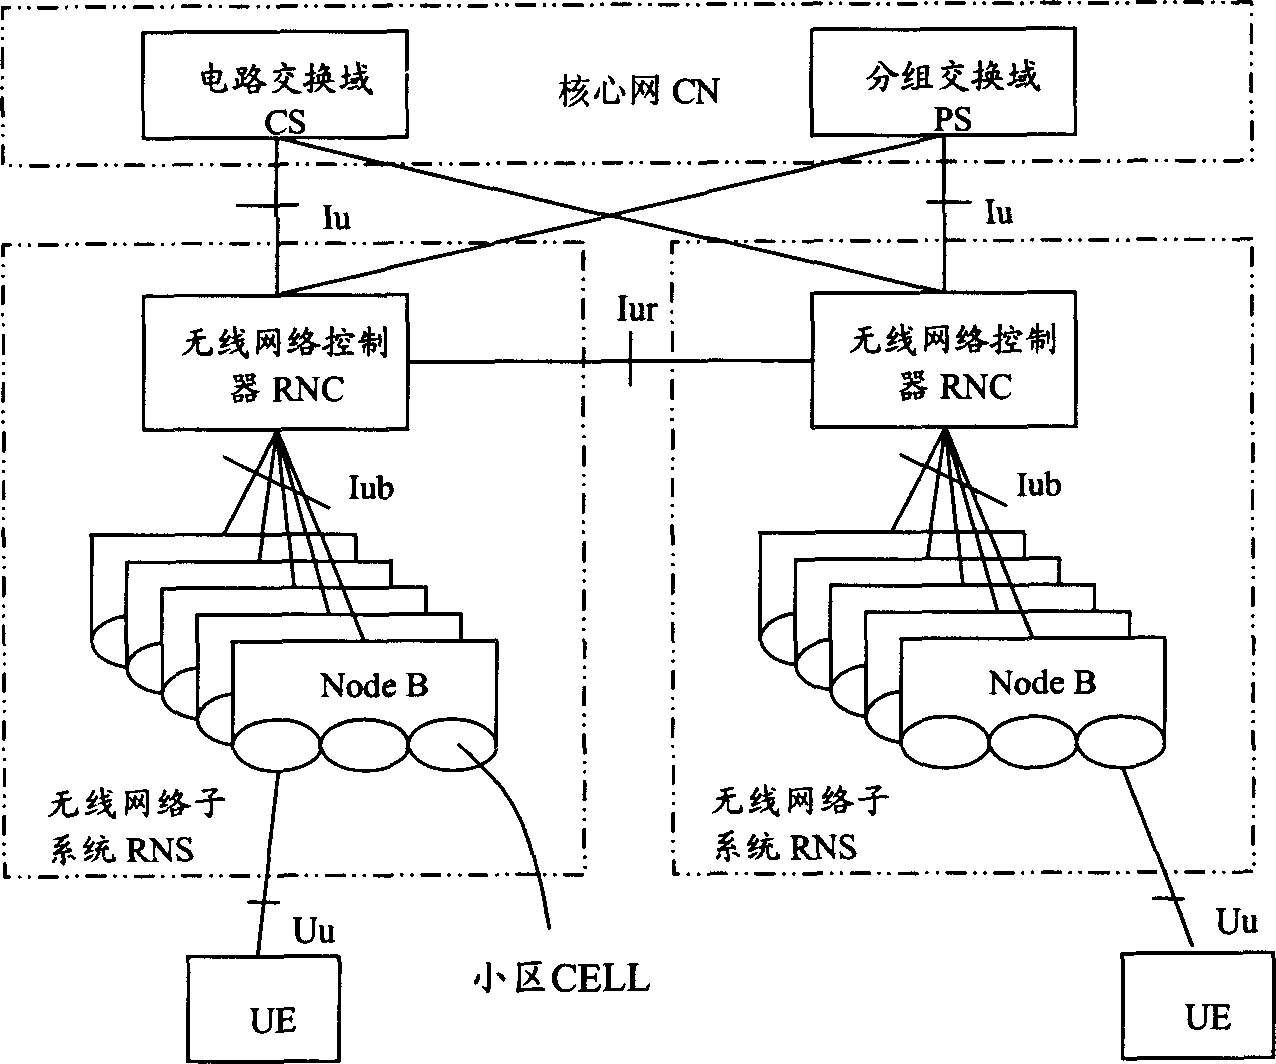 Distributing method for VOIP service band width